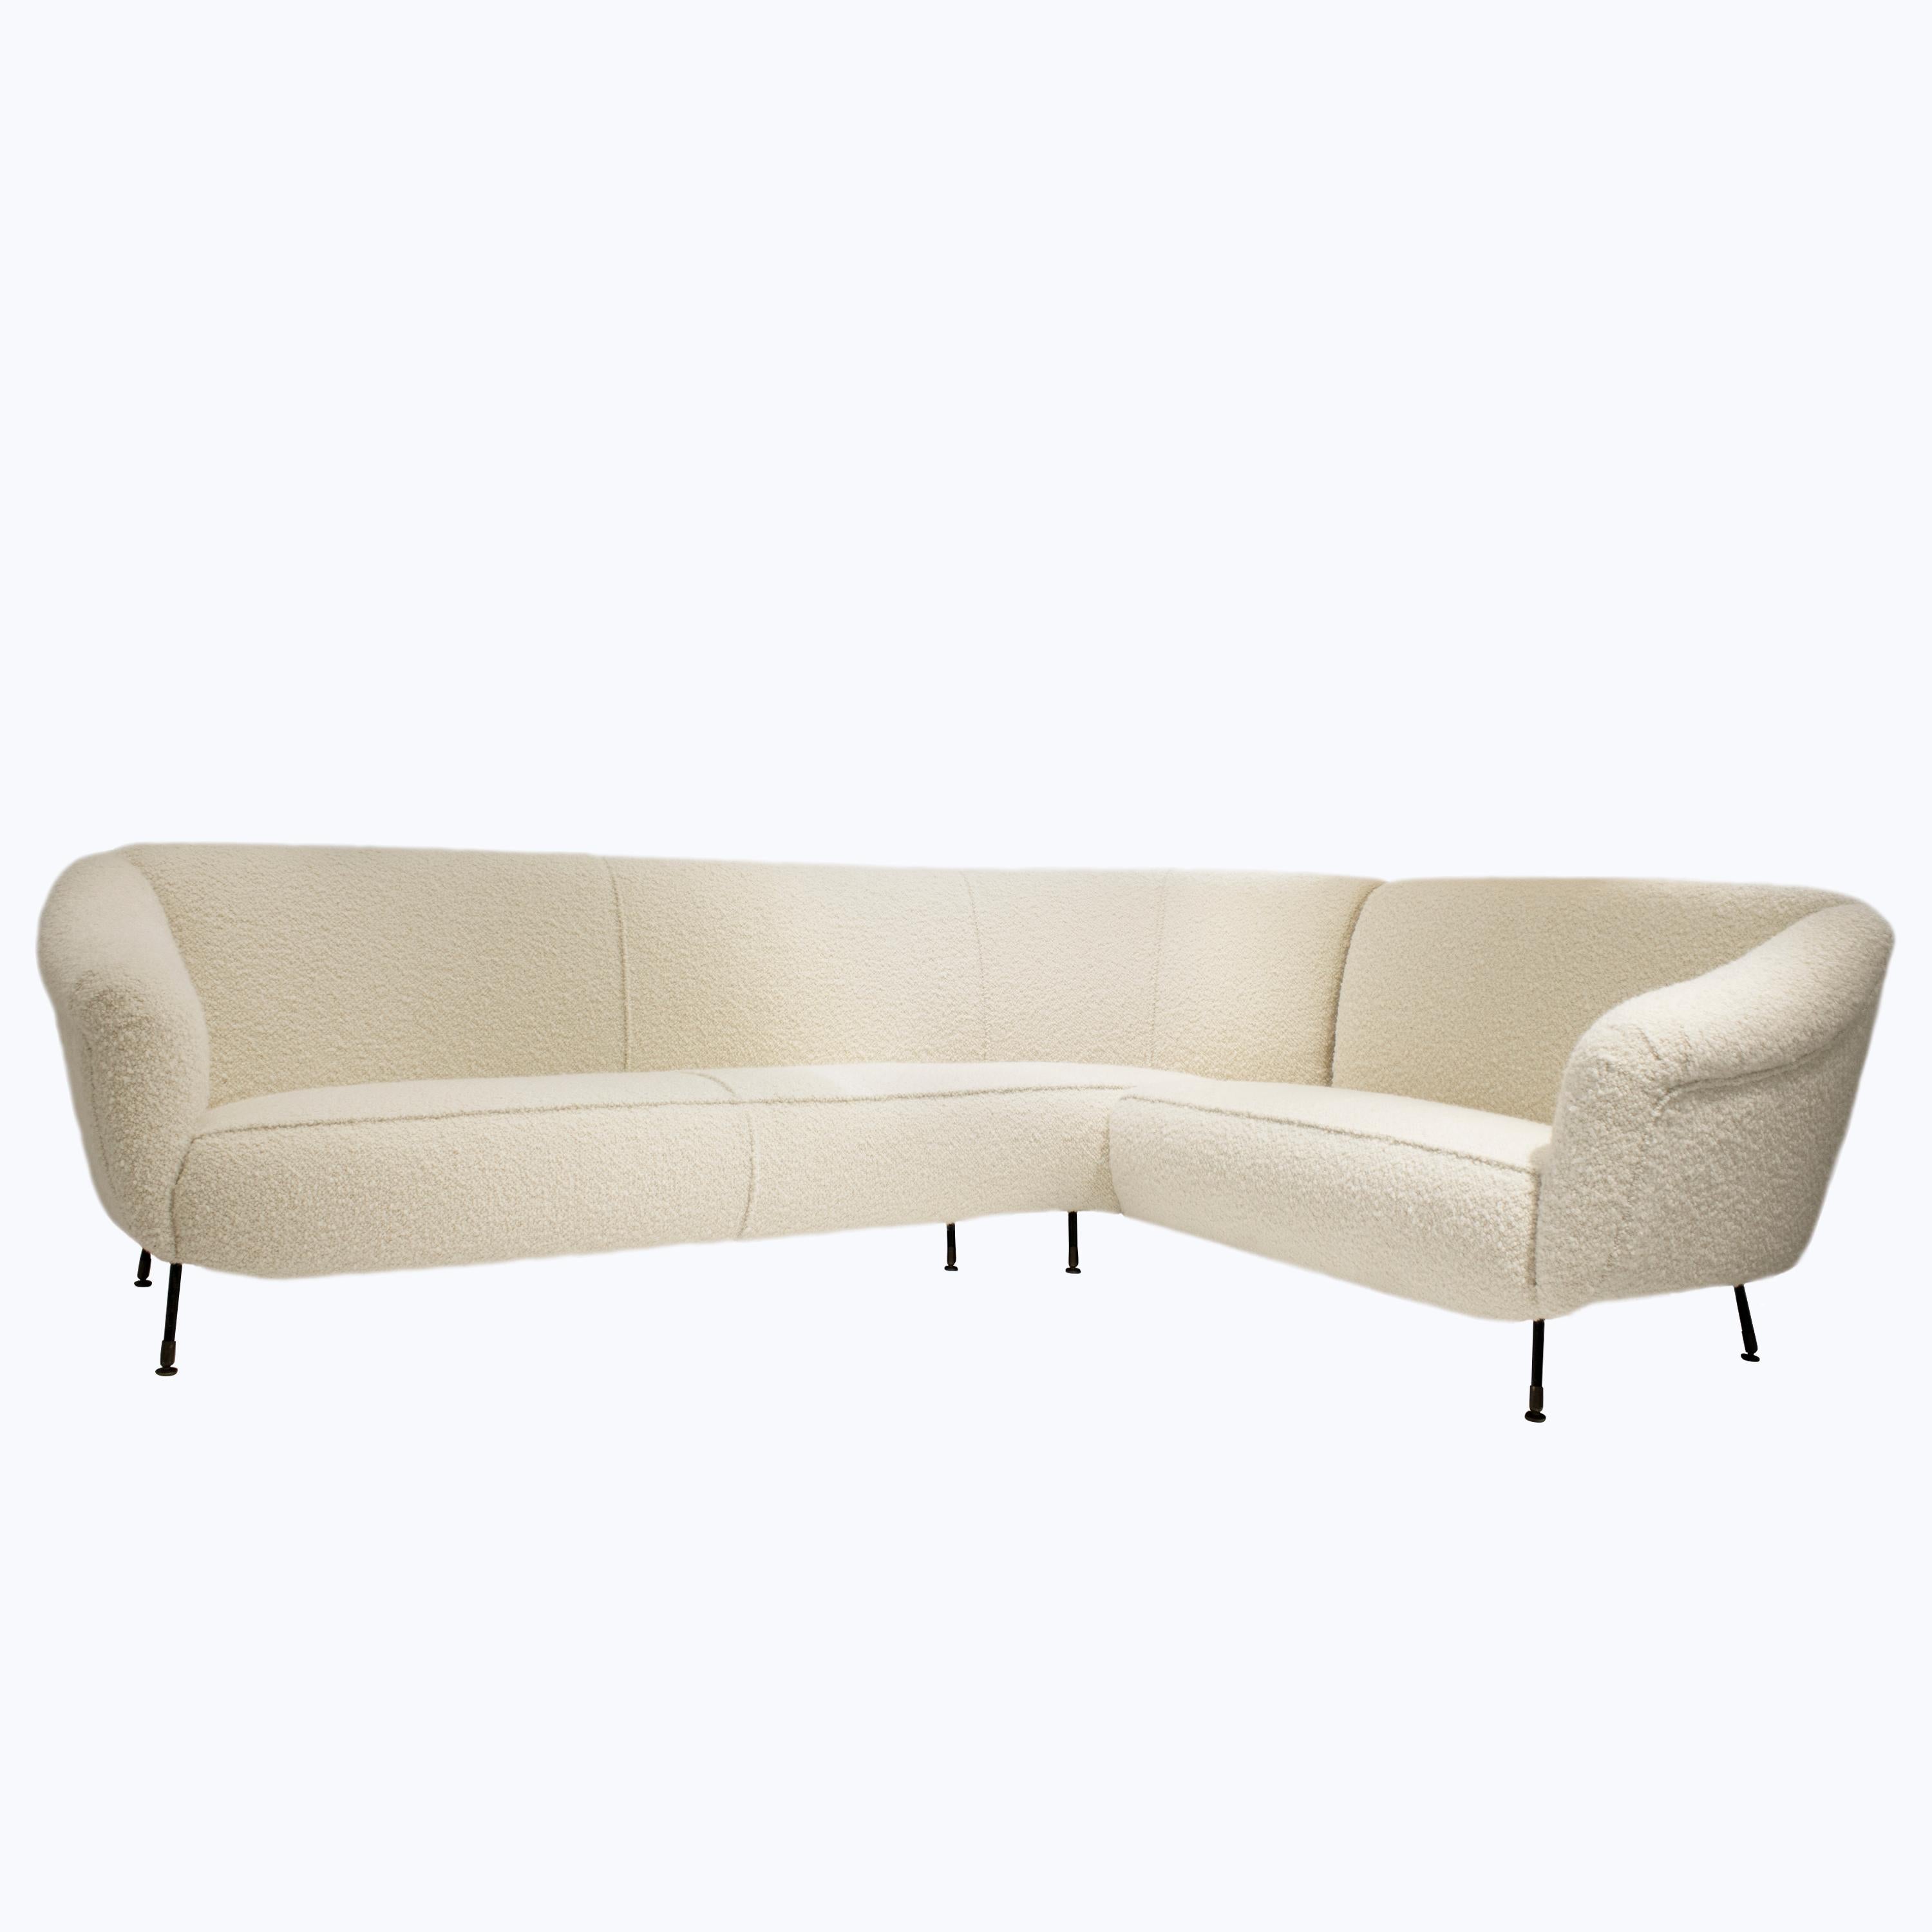 Mid-Century Modern Midcentury Sofa with Wooden Structure Reupholstered in Biege Bucle, Italy, 1950